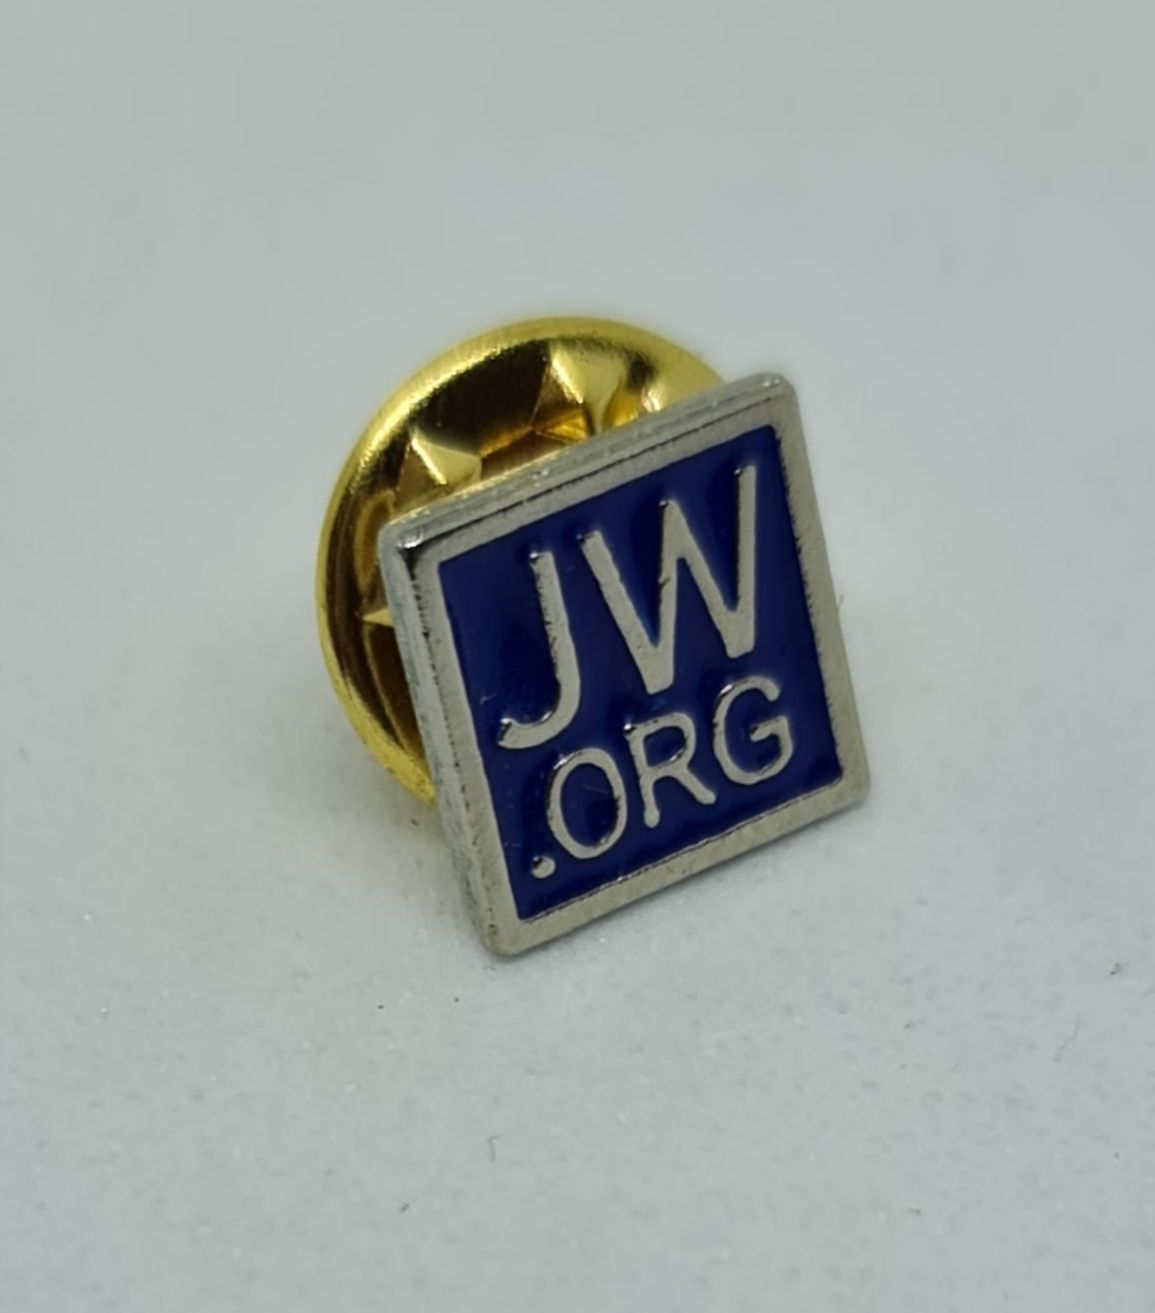 Pin JW.Org - 4Lover's